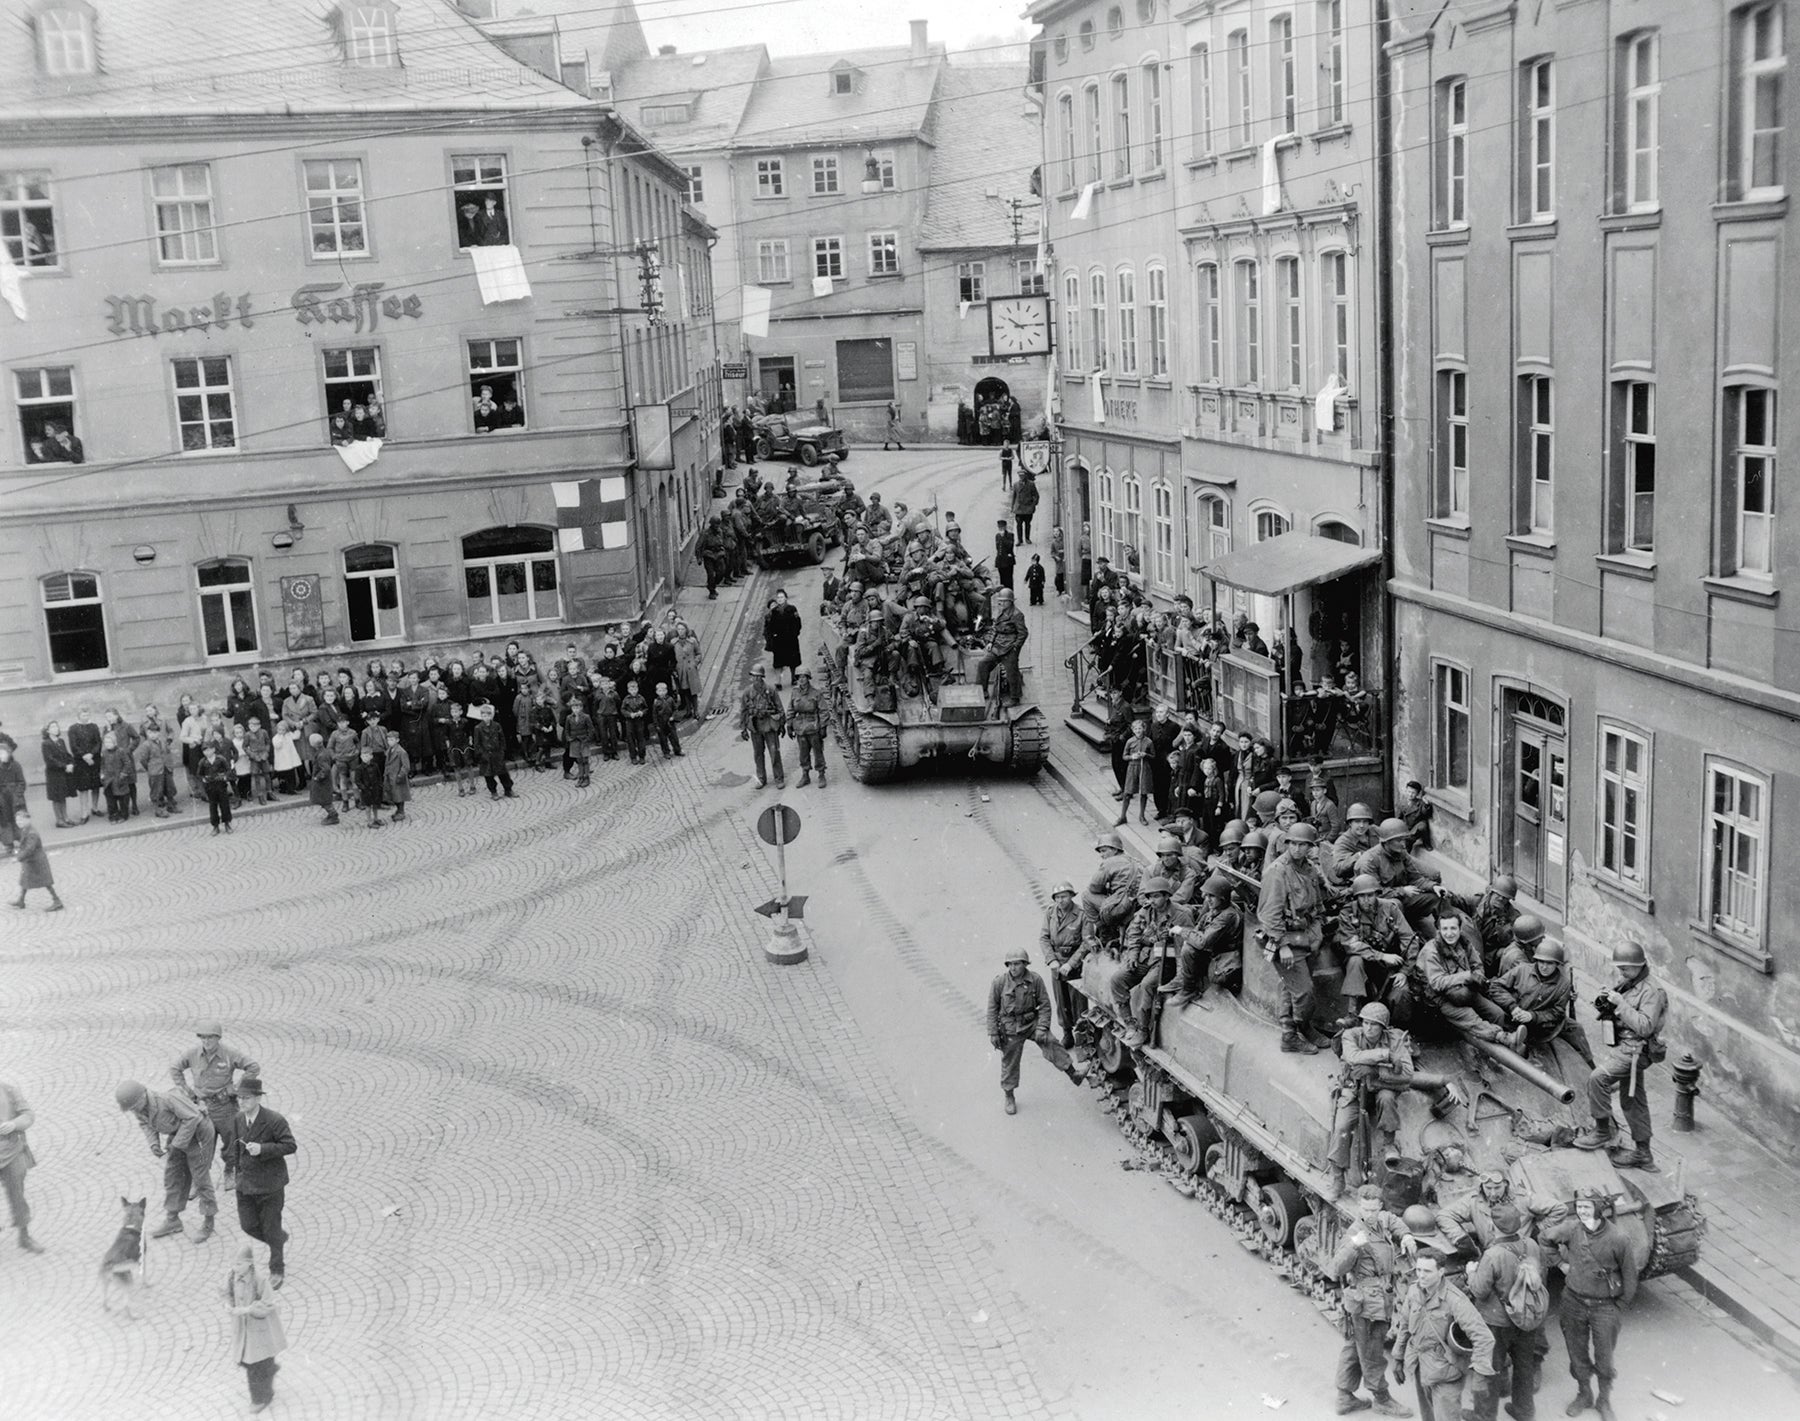 Tanks transport 90th Infantry Division troops through Lobenstein, Germany, in April 1945. (Credit: U.S. Army/Tec 4 James Ryan)